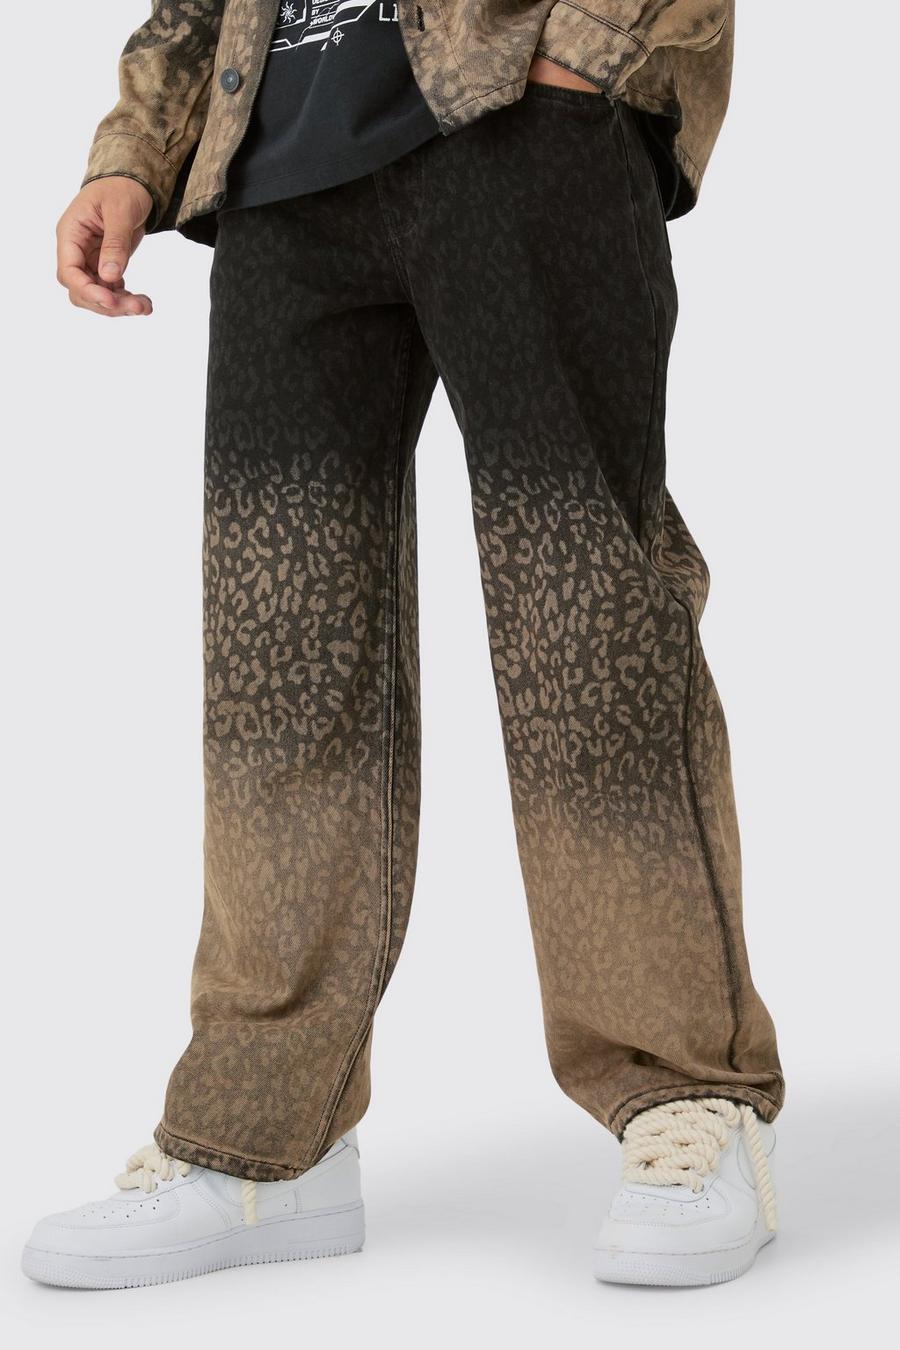 Baggy Rigid Leopard Print Jeans In Tinted Black